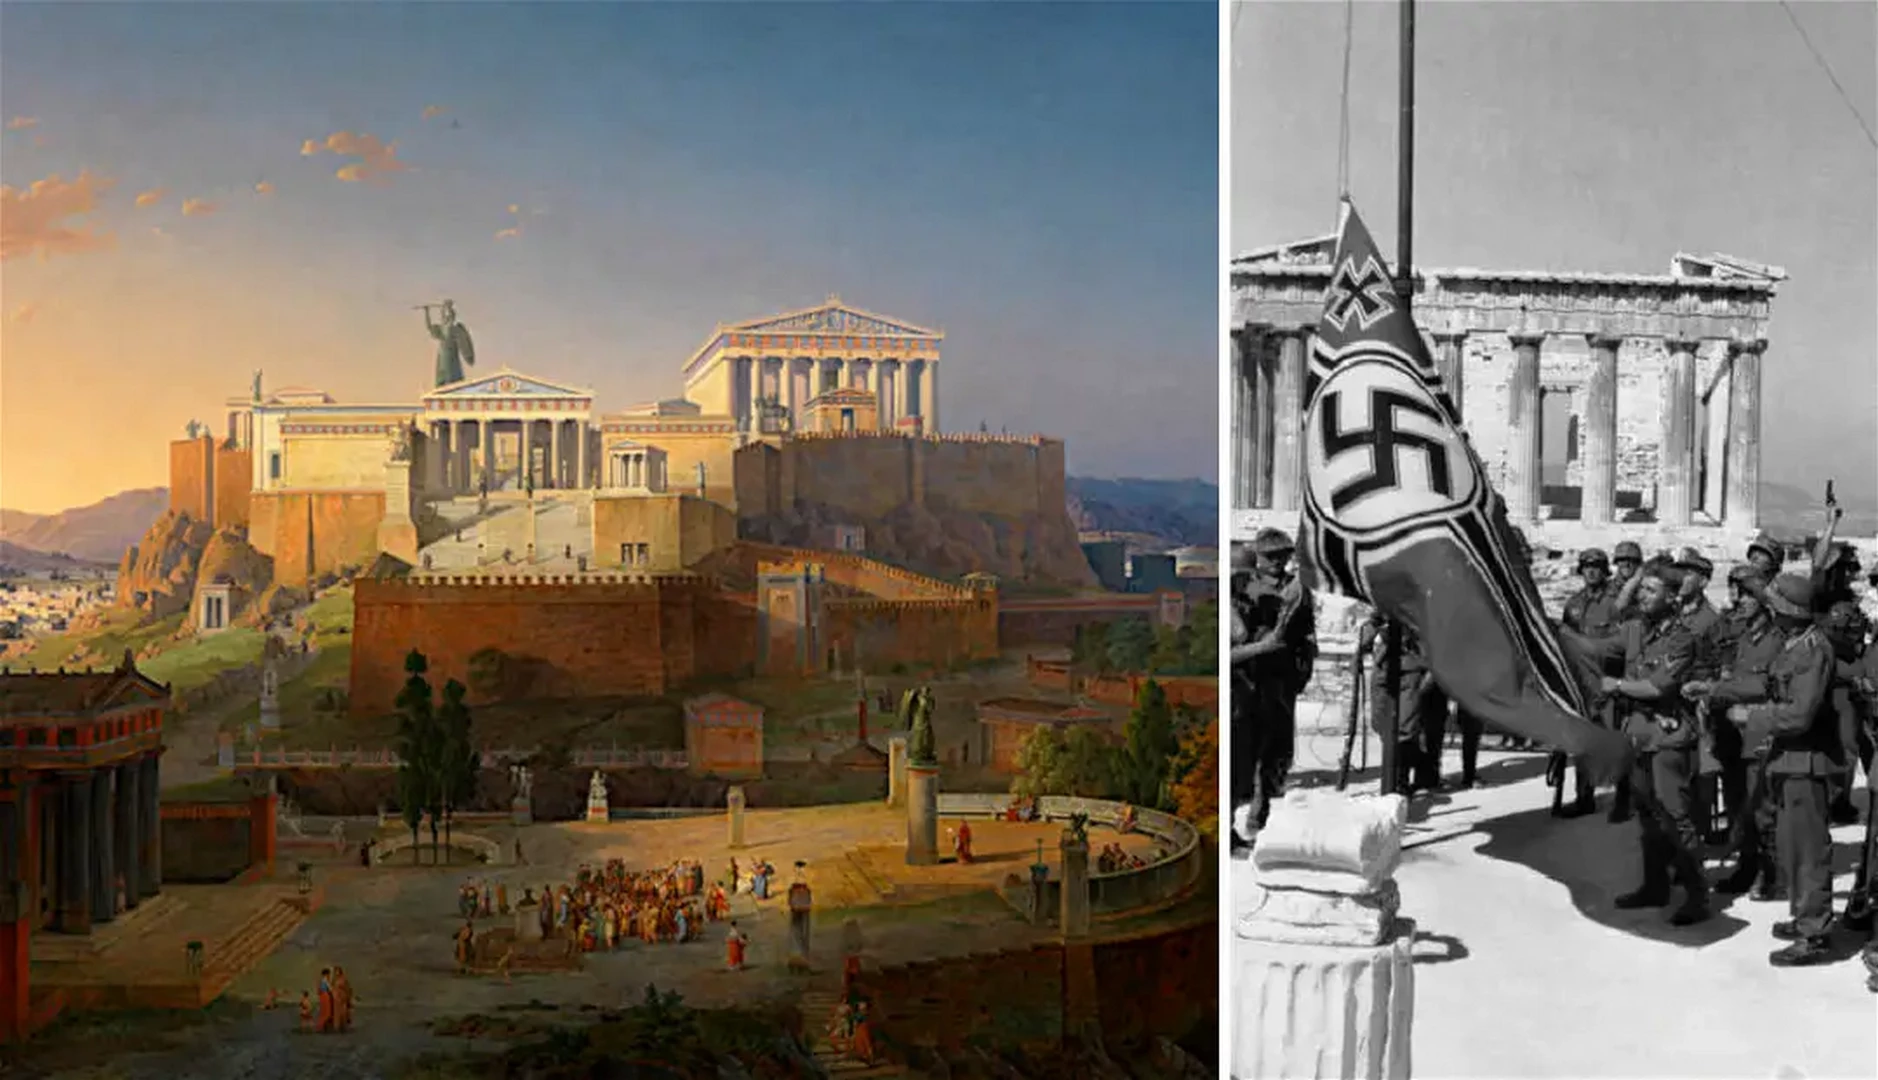 13 Facts You Did Not Know About the Acropolis of Athens